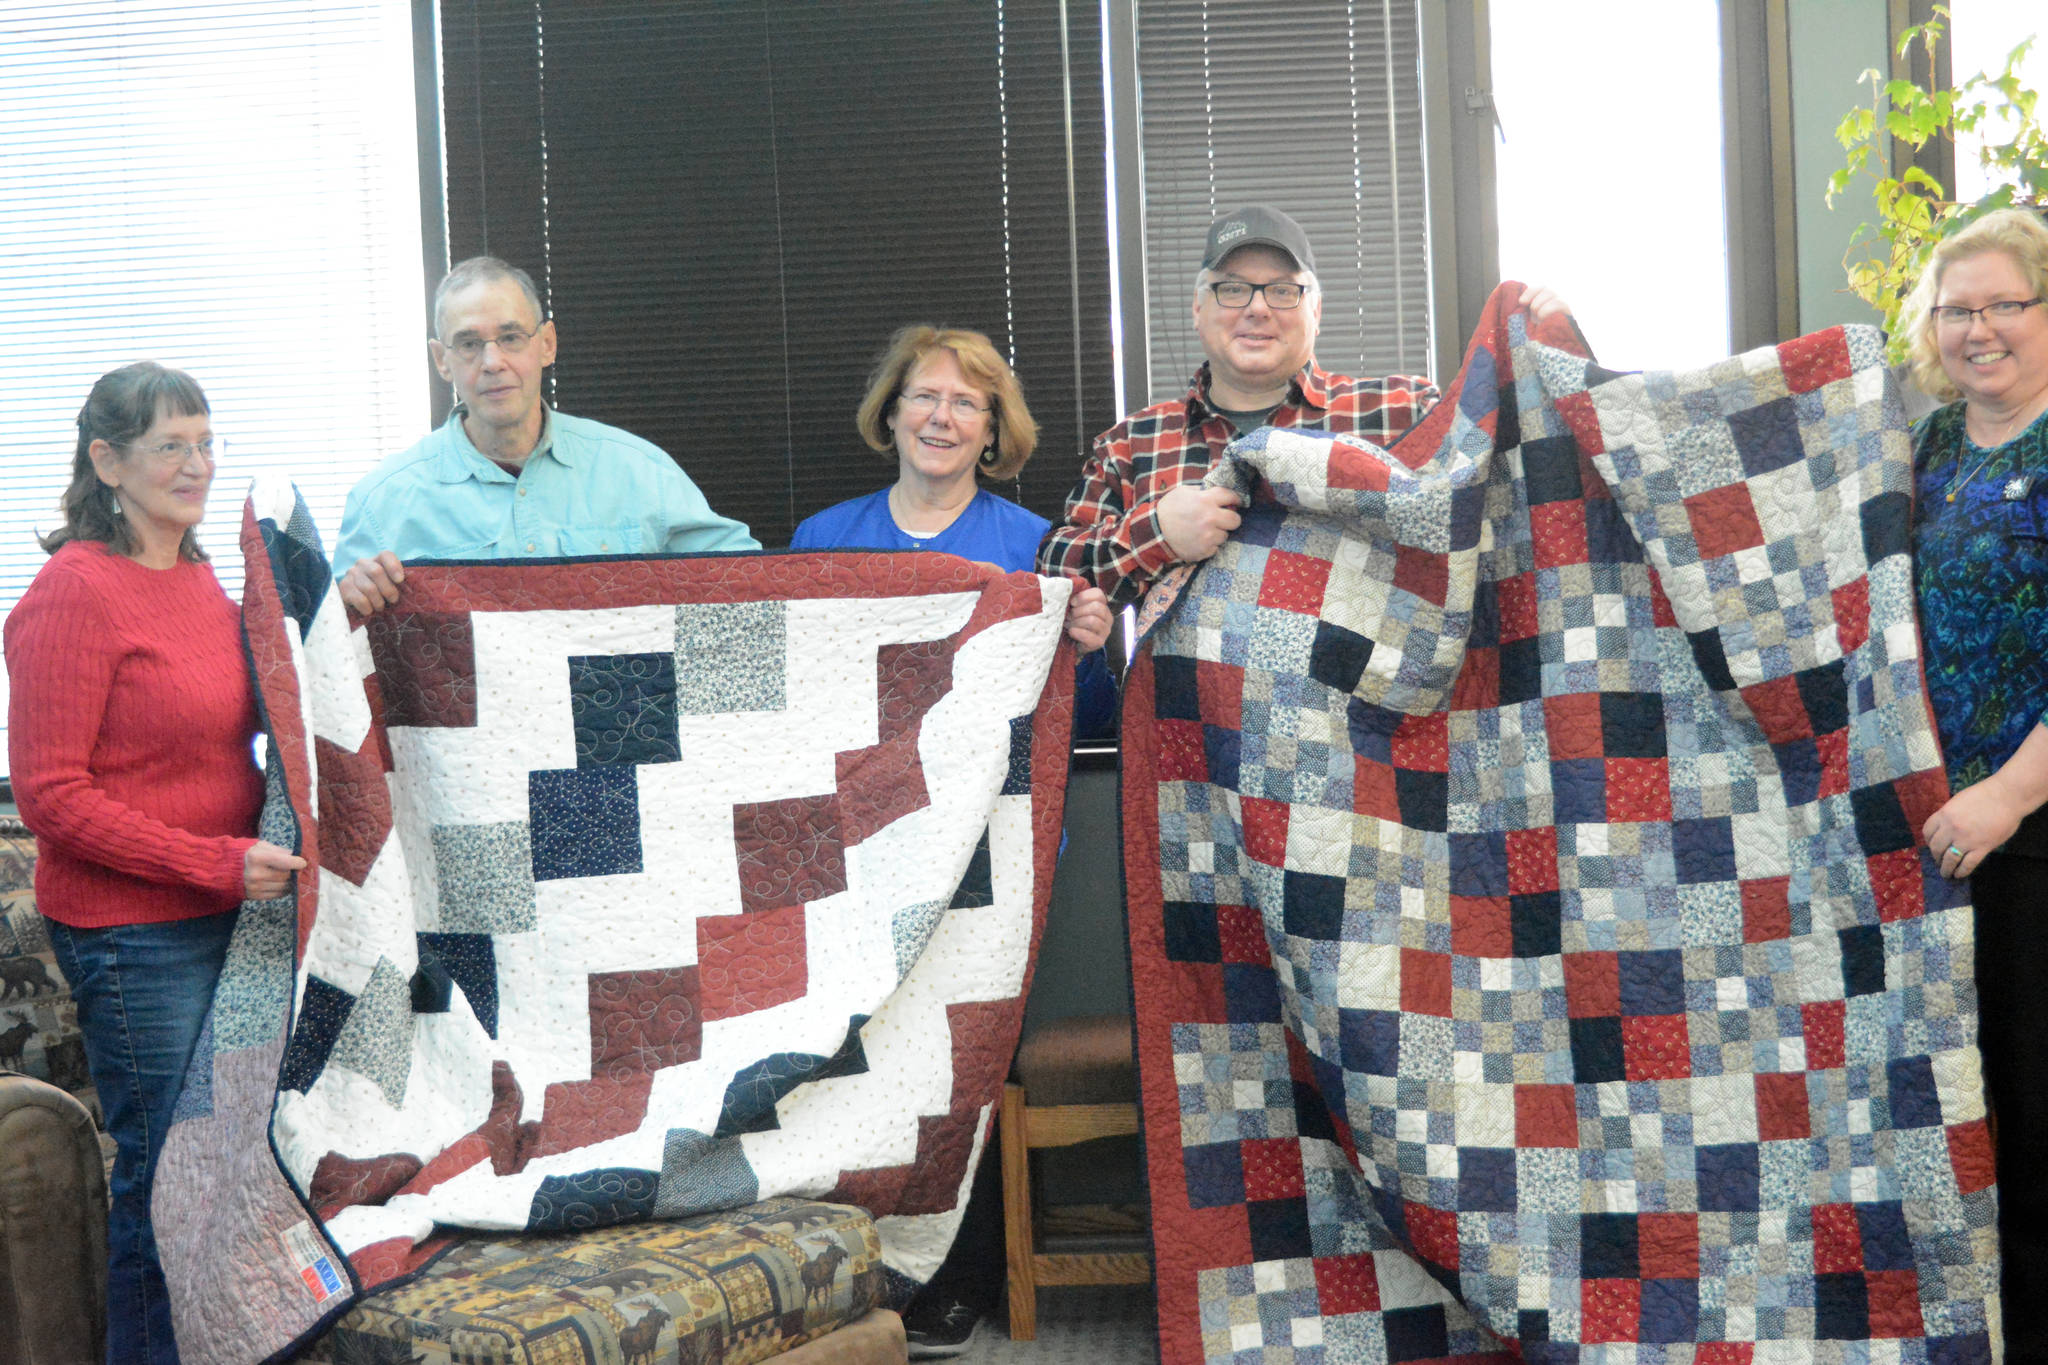 Jay Green, second from left, and Andrew Hodnik, second from right, hold up Quilts of Valor given to them and made by Dana Moore, far left, and Connie Isenhour, far right. The quilts are a project of Faith Friday Friends, a group at Faith Lutheran Church. Under the national program volutneers make quilts to honor service members and veterans touched by war. Green flew 196 combat missions in Vietnam as a U.S. Navy pilot from 1967-68 and Hodnik served in the U.S. Army as a combat engineer from 1989-93, including tours in Operation Desert Storm and Somalia. In the middle is Hodnik’s mother, Dr. Vicky Hodnik. The quilts were presented at Hodnik’s dental office on Feb. 6 in Homer, Alaska. (Photo by Michael Armstrong, Homer News)